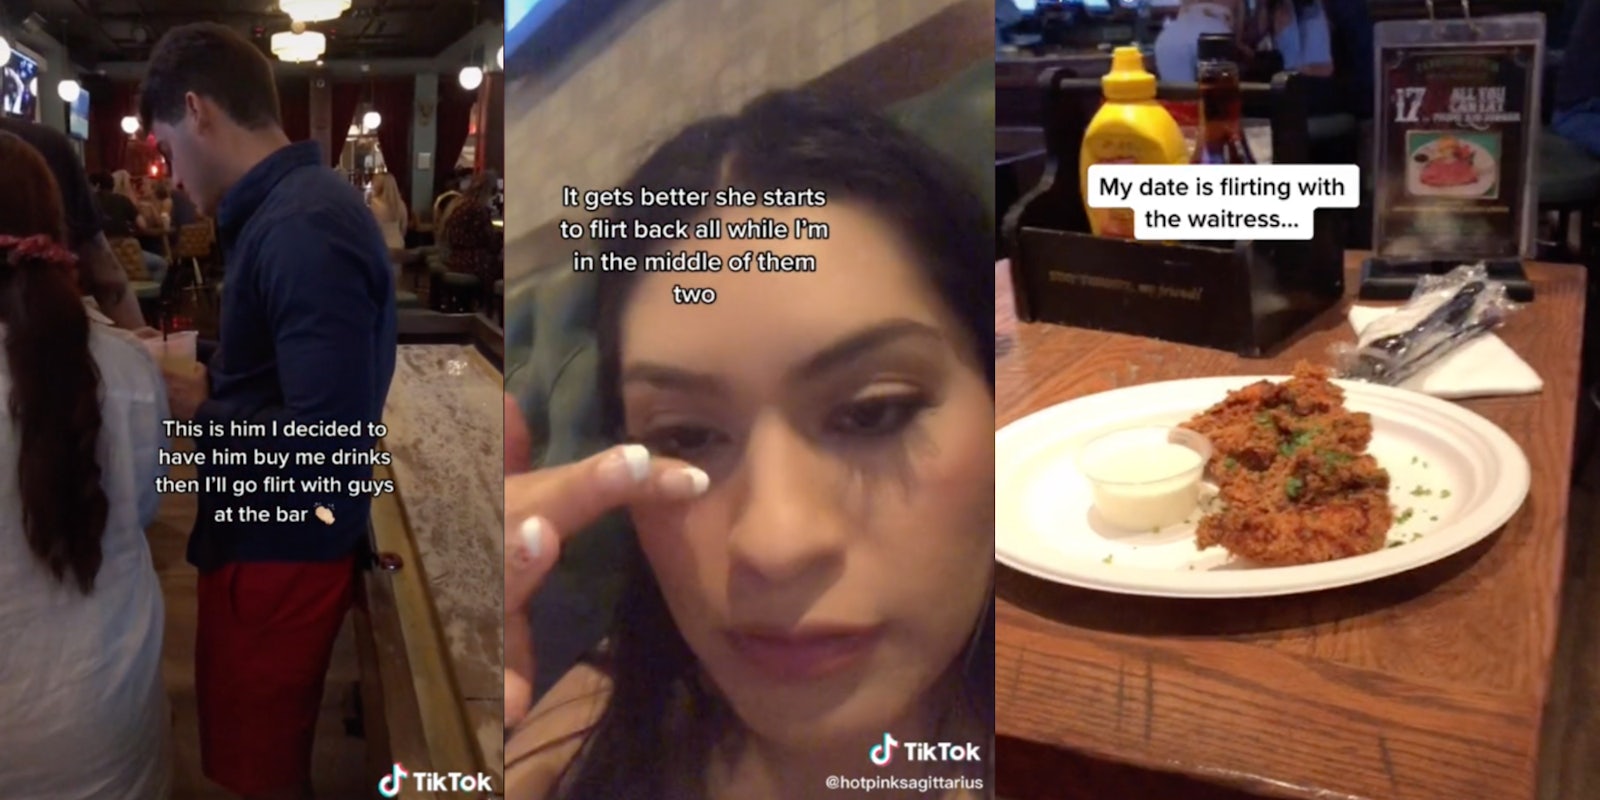 woman's date filmed flirting with their waitress